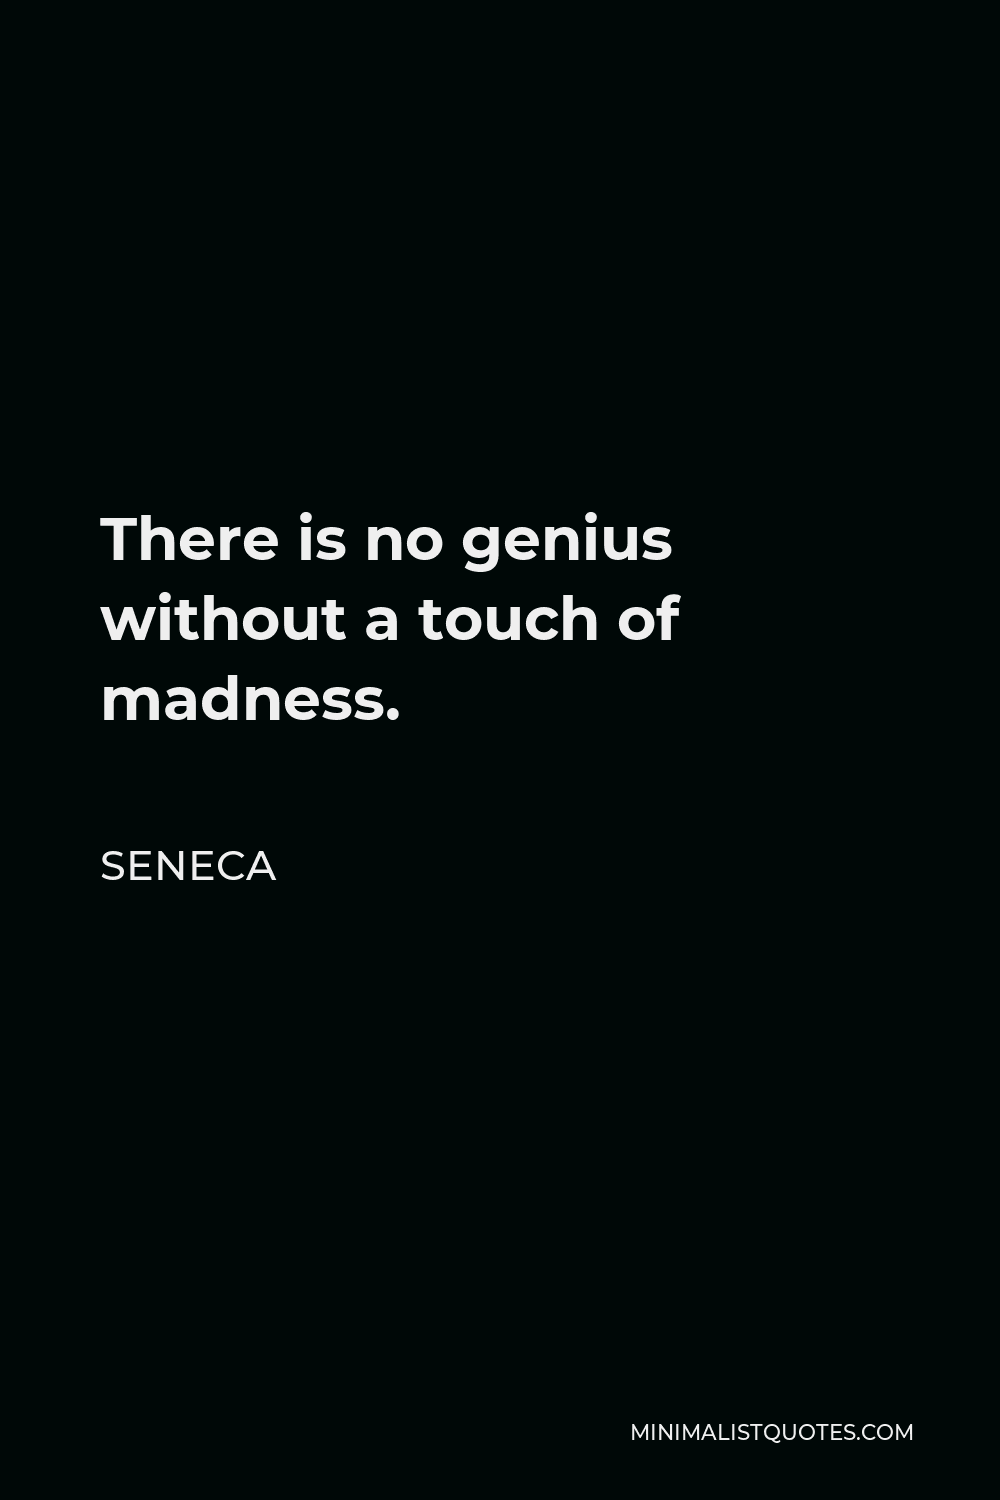 Seneca Quote - There is no genius without a touch of madness.